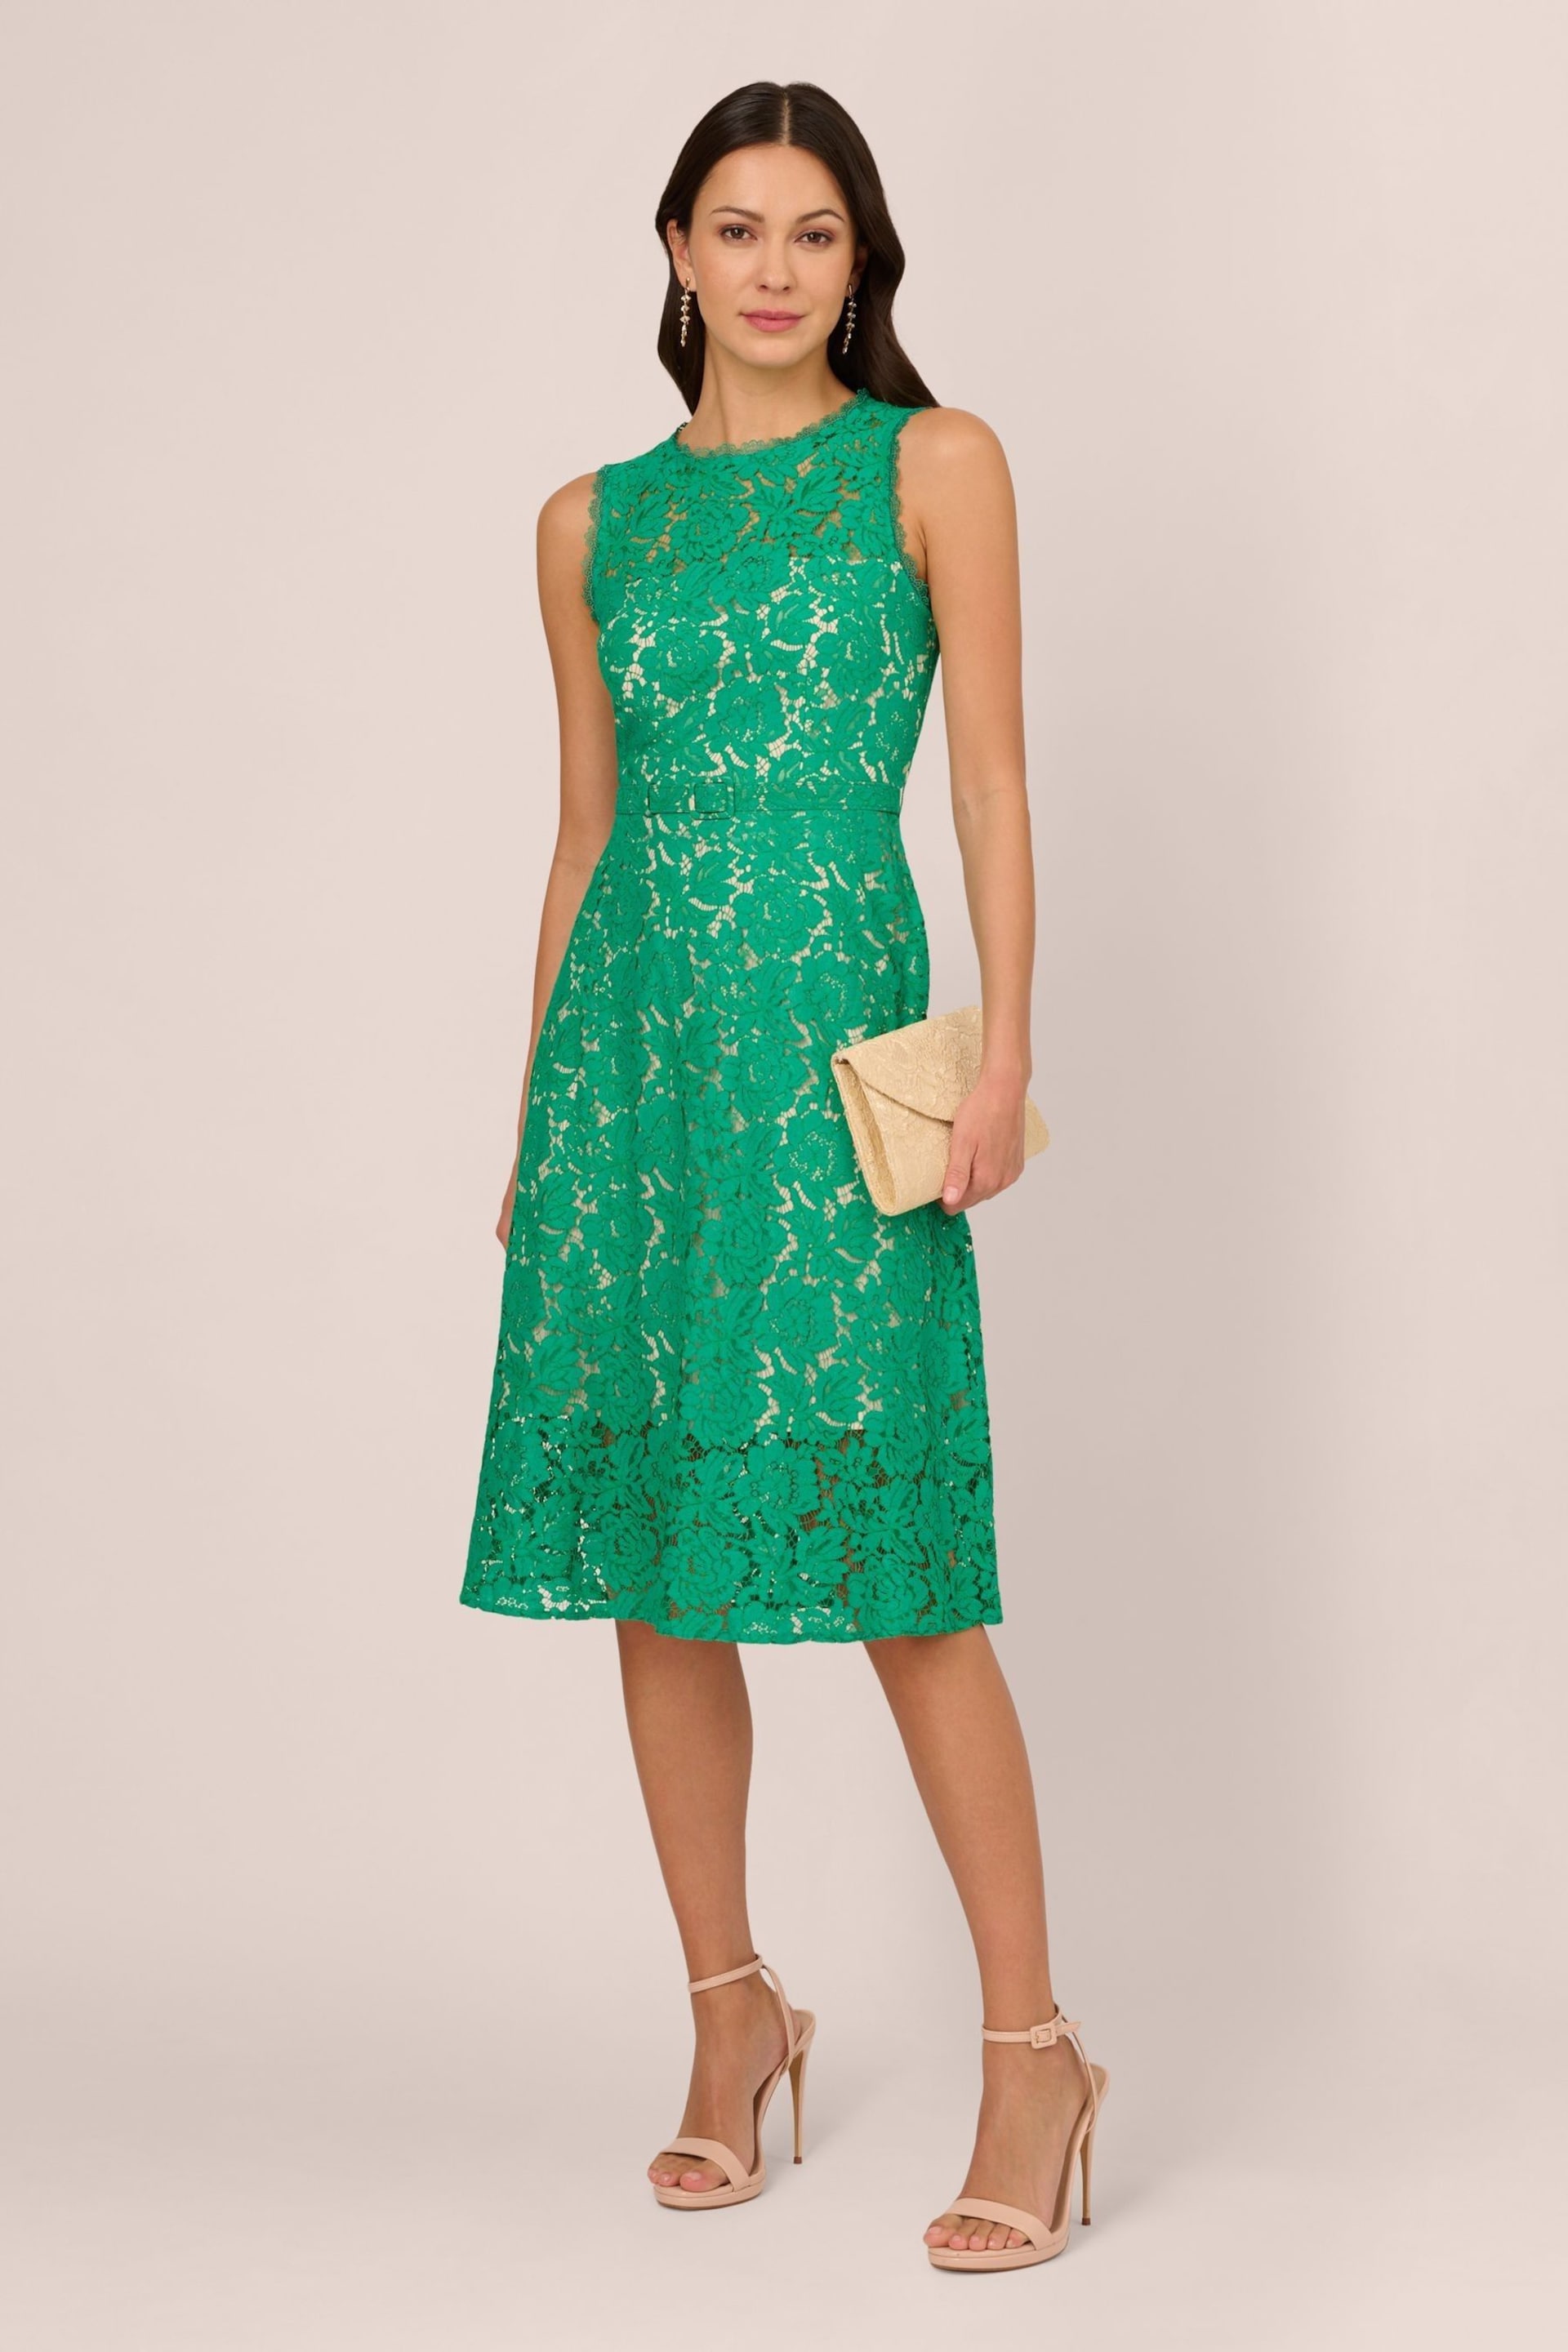 Adrianna Papell Green Lace Midi Dress - Image 4 of 7